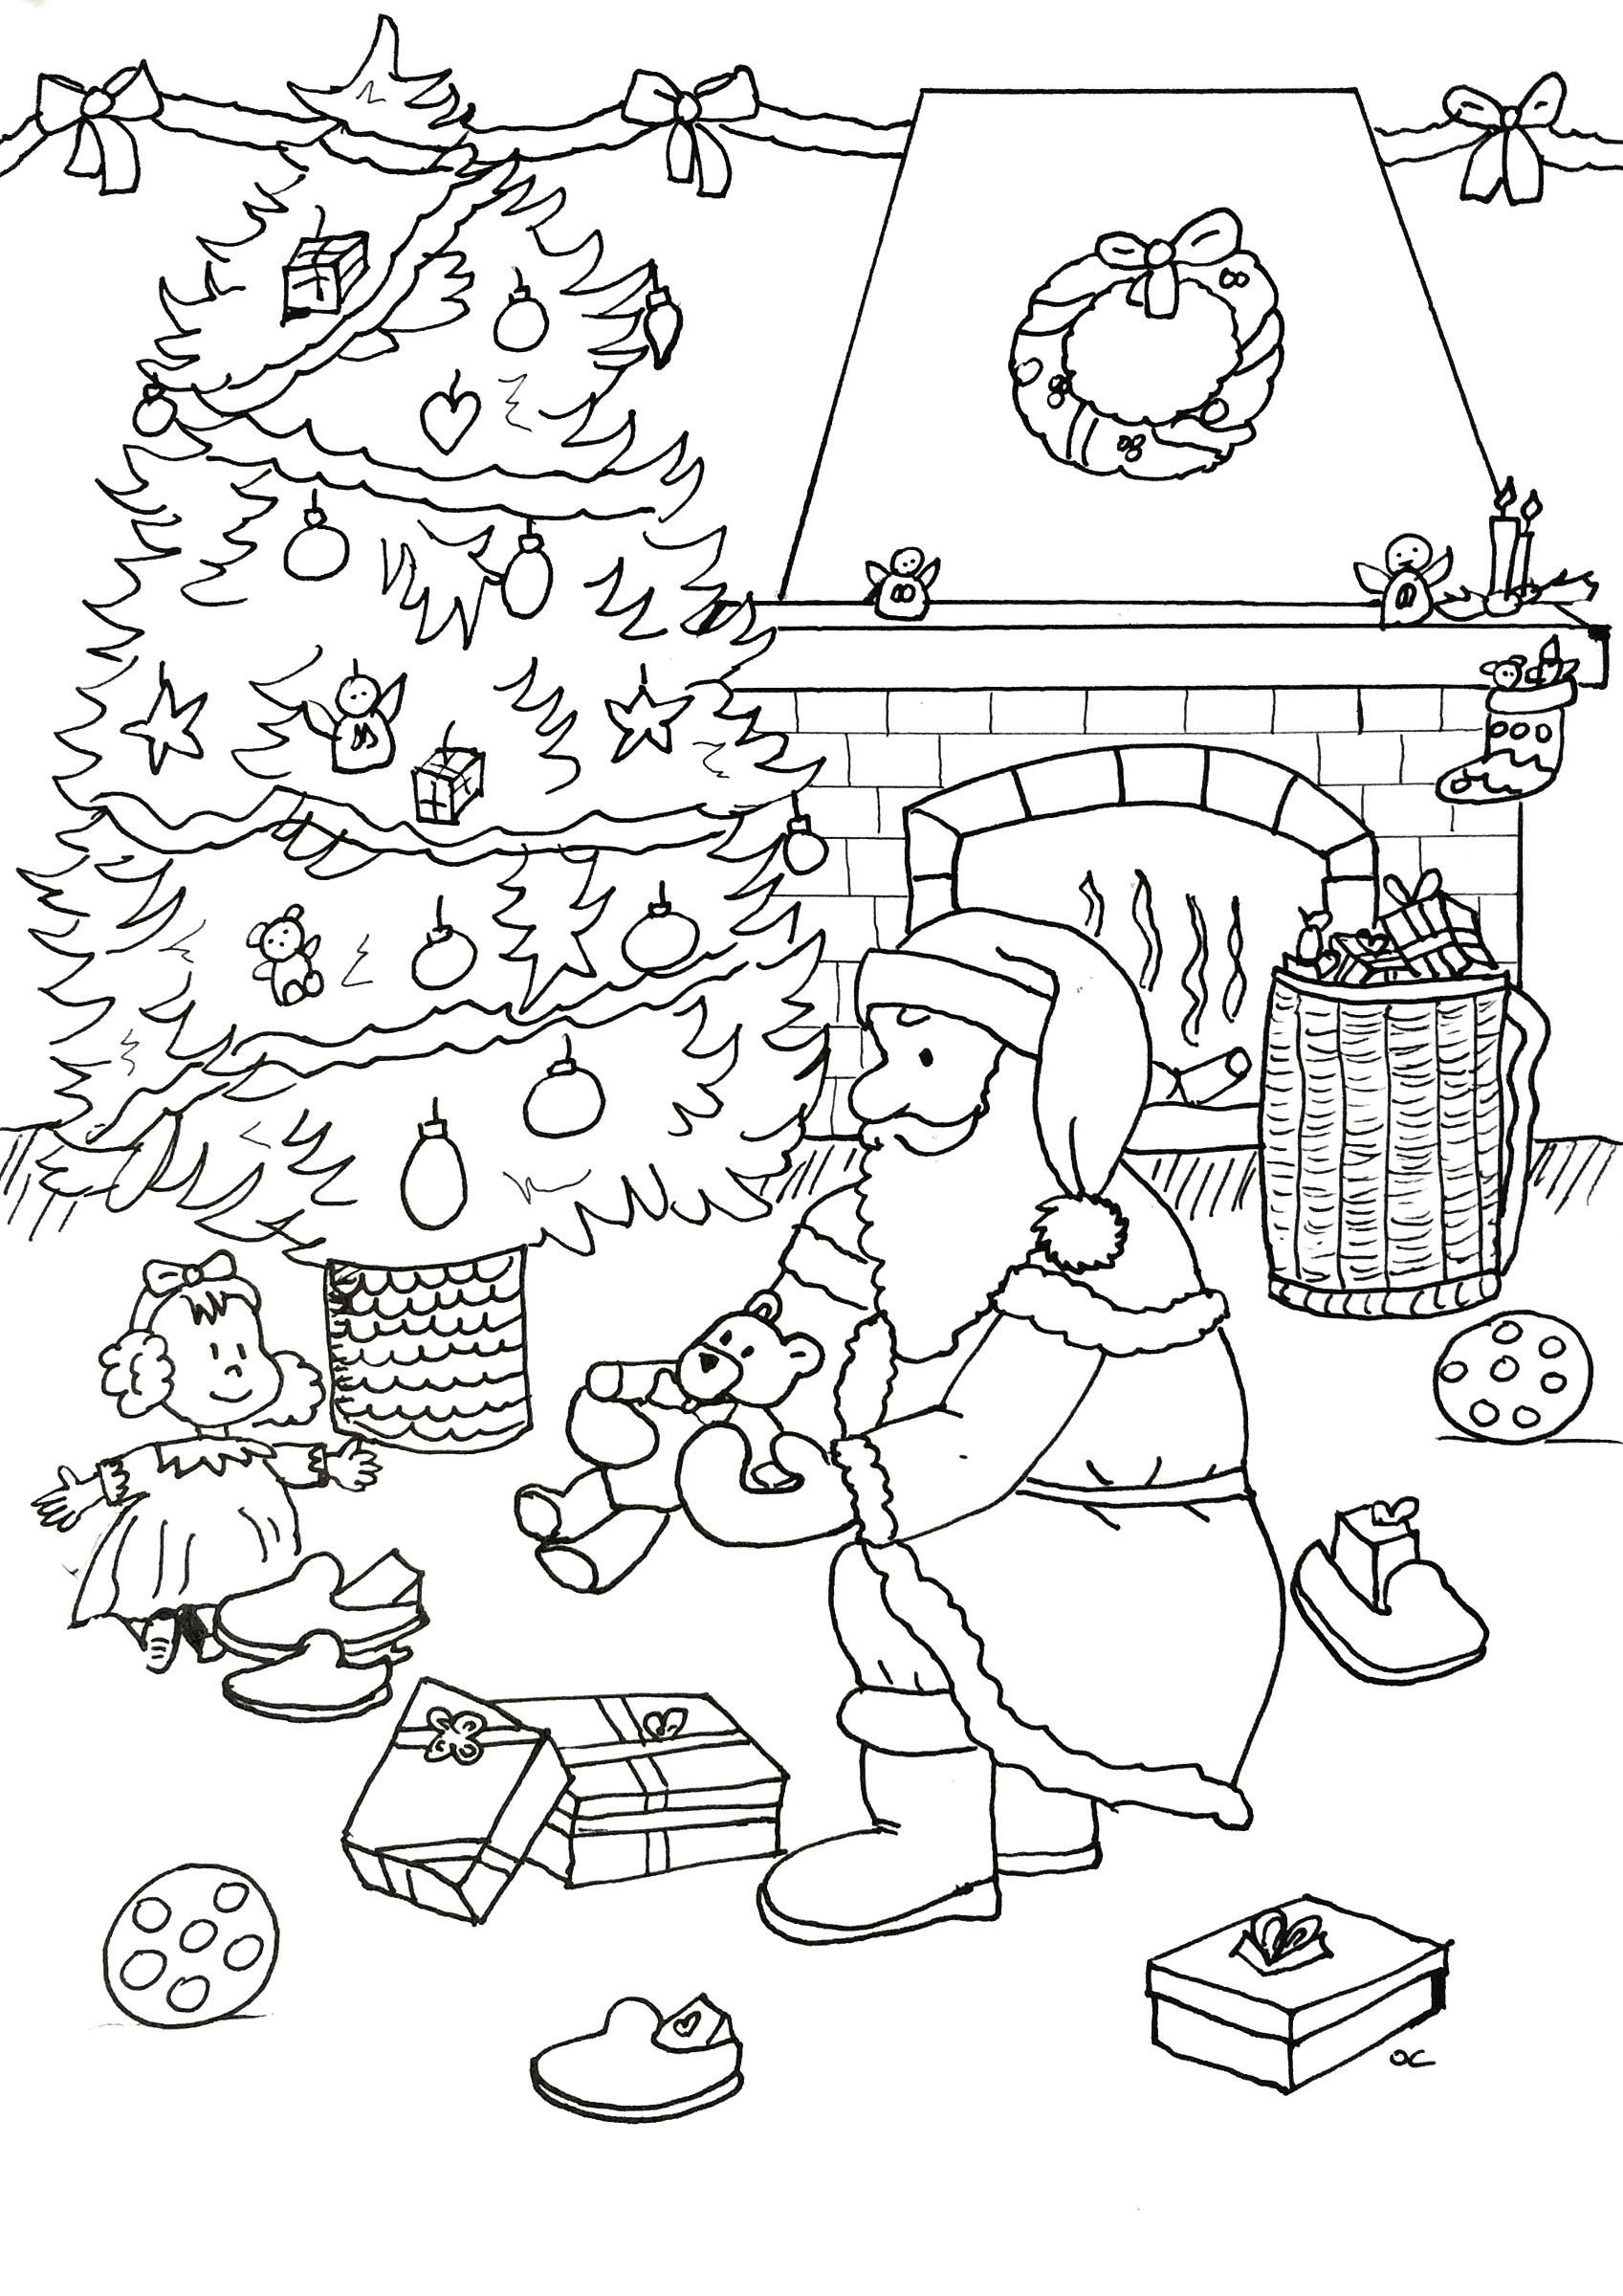 Santa Claus preparing the gifts at the foot of the tree, by Olivier